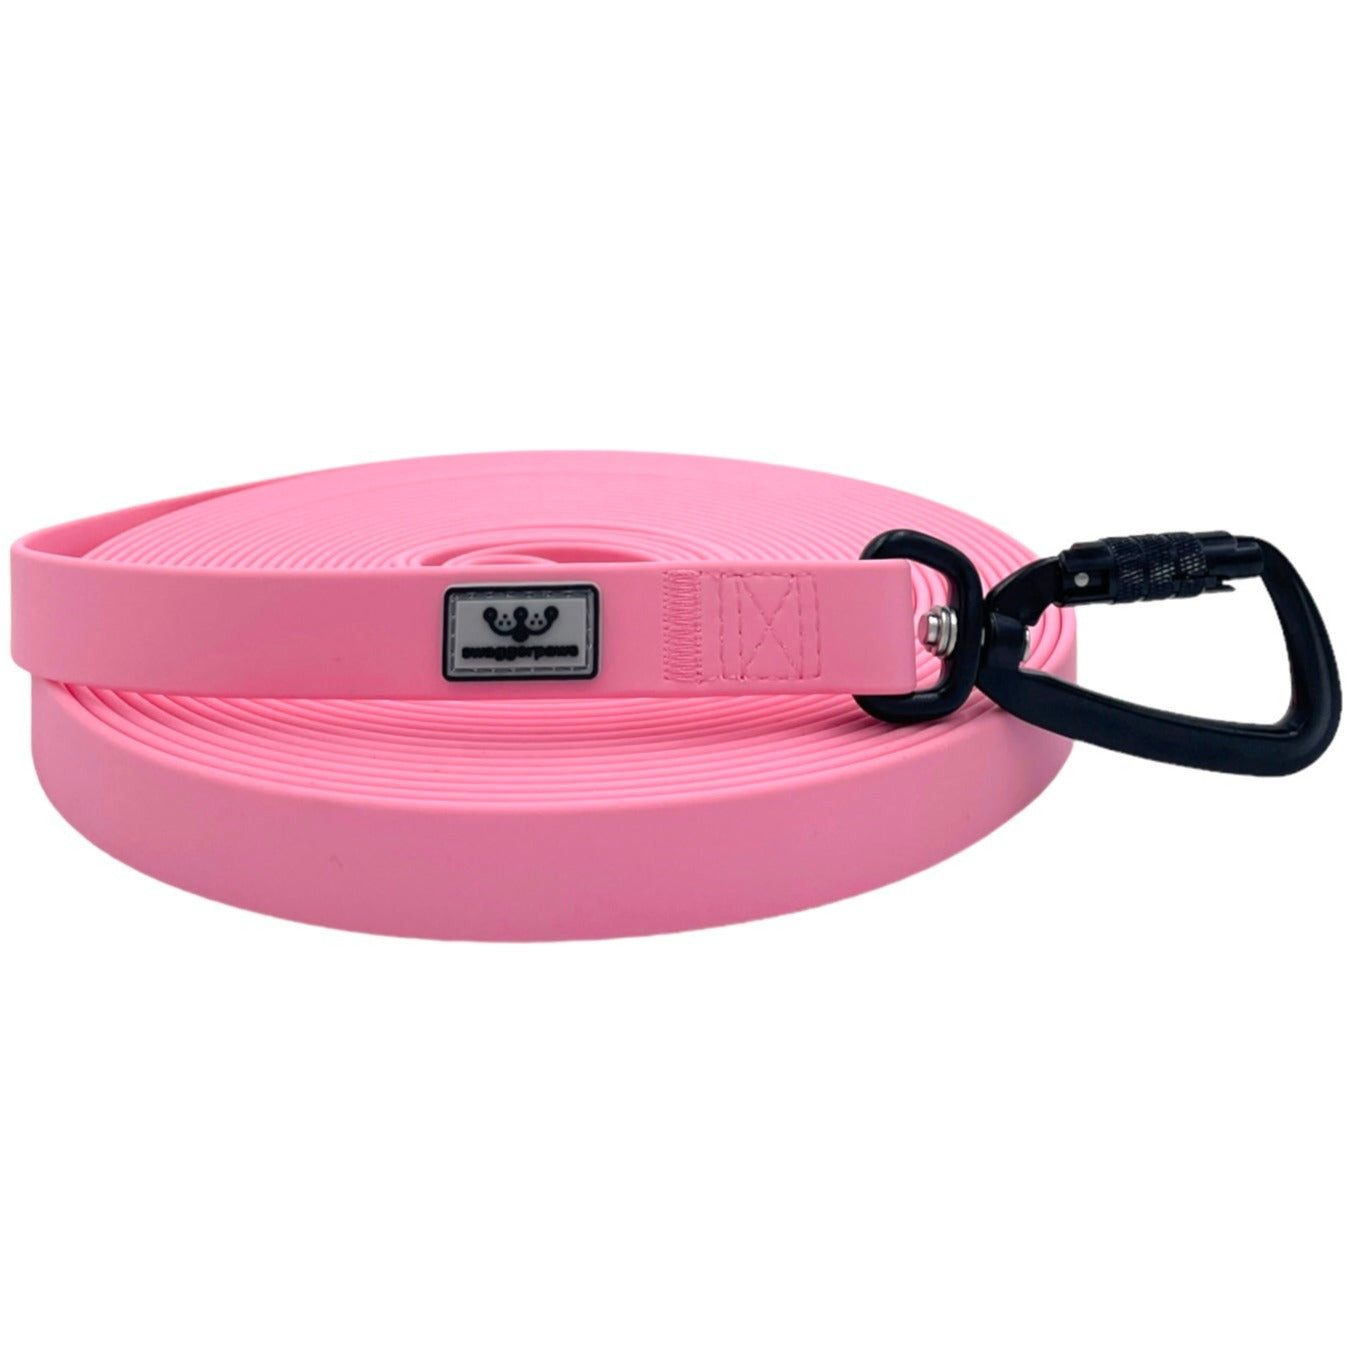 SwaggerPaws waterproof long line dog lead with auto-lock carabiner, flamingo pink